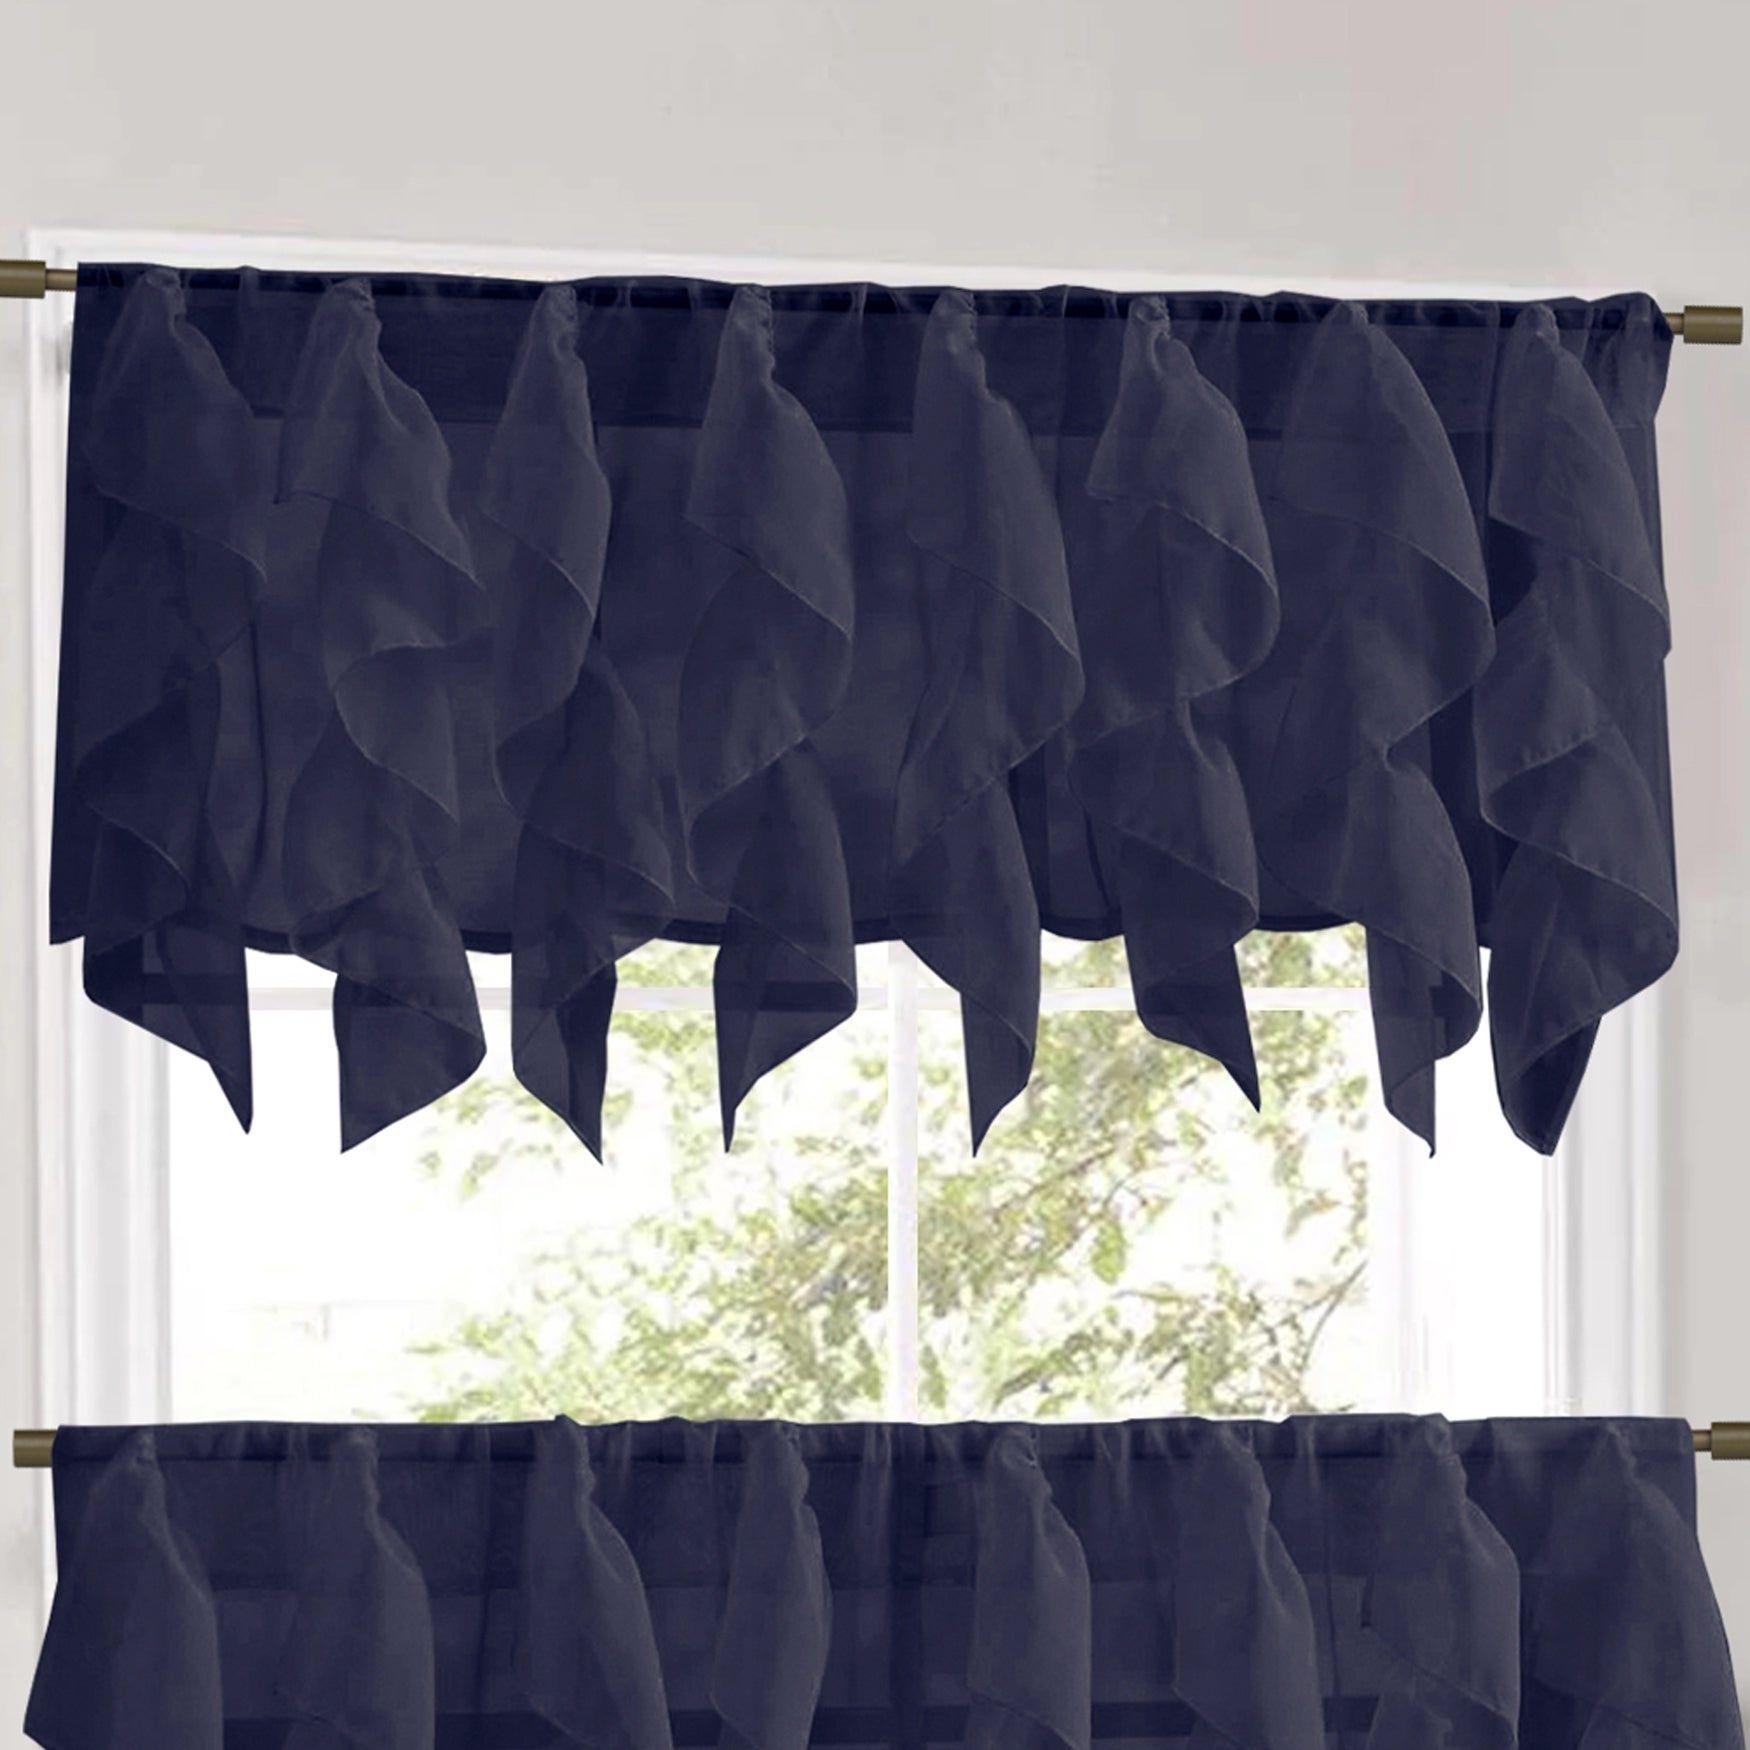 Sweet Home Collection Navy Vertical Ruffled Waterfall Valance And Curtain  Tiers Within Vertical Ruffled Waterfall Valances And Curtain Tiers (View 7 of 20)